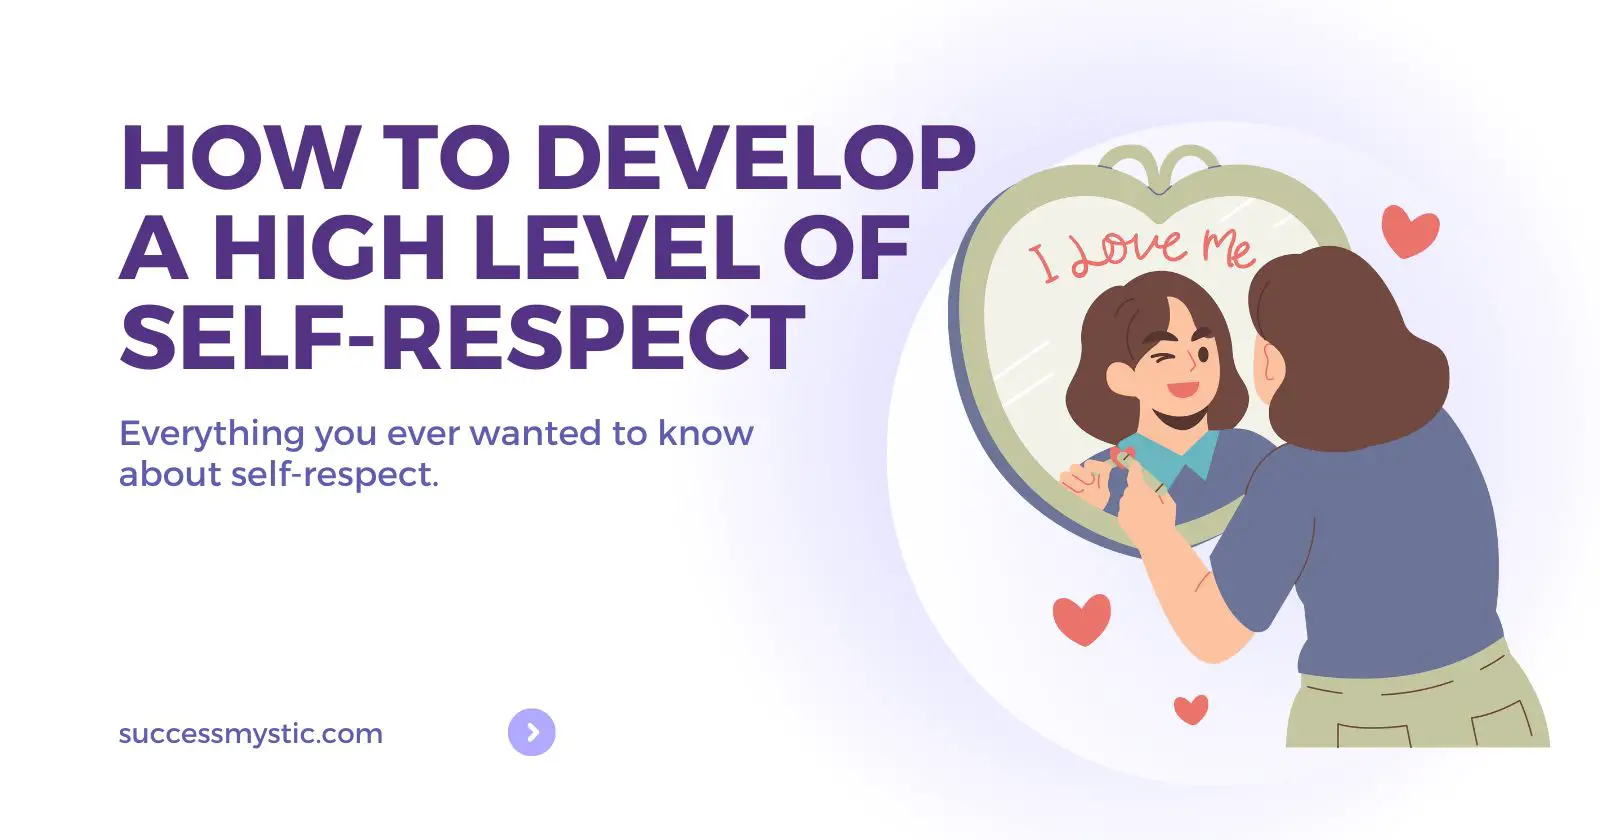 Develop A High Level of Self-Respect